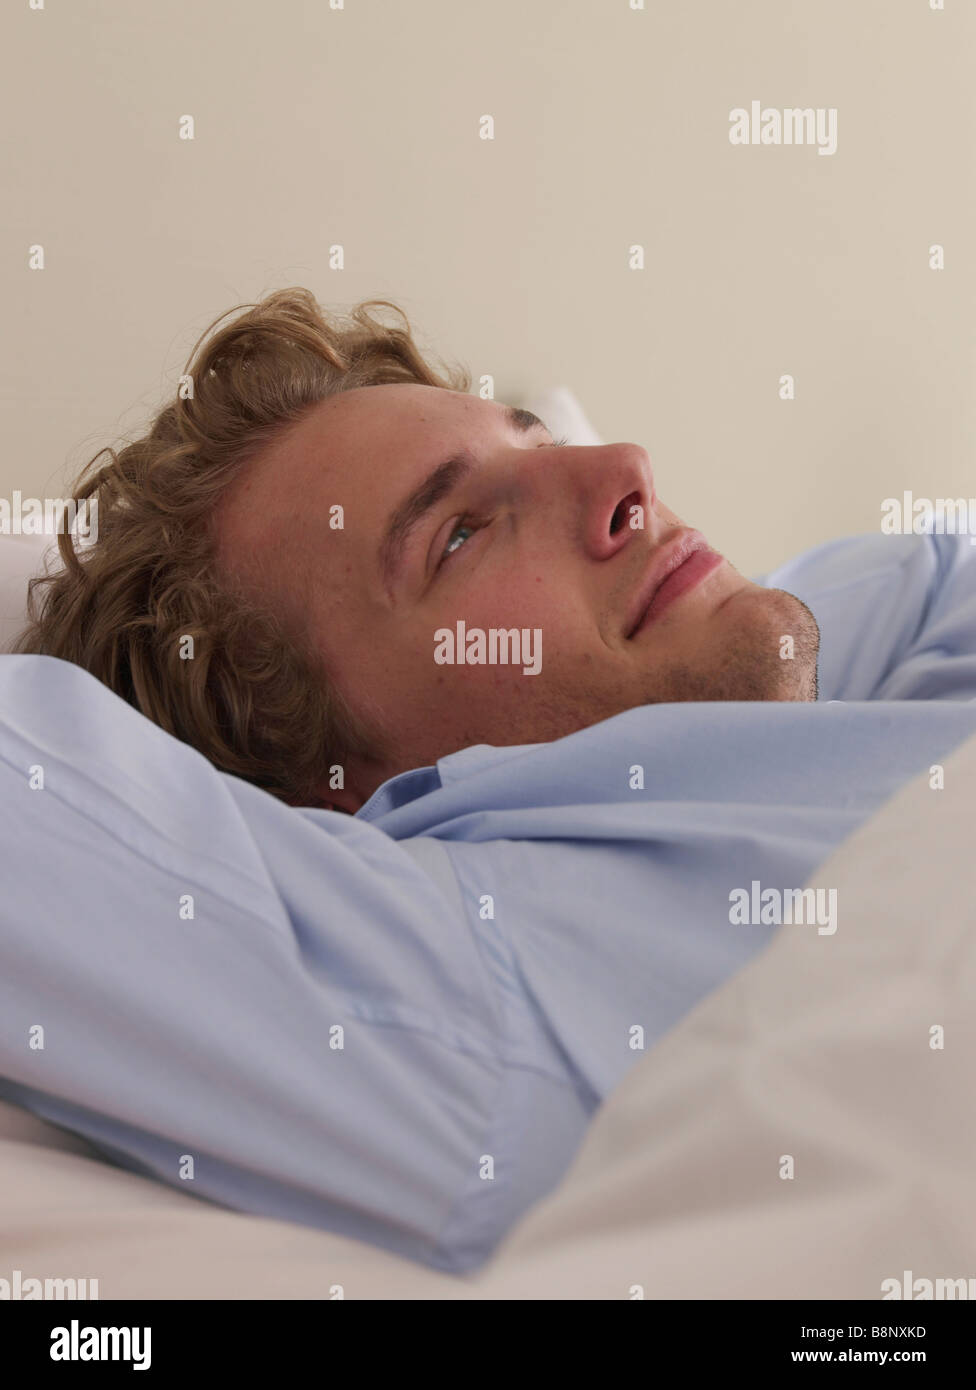 young man in bed Stock Photo